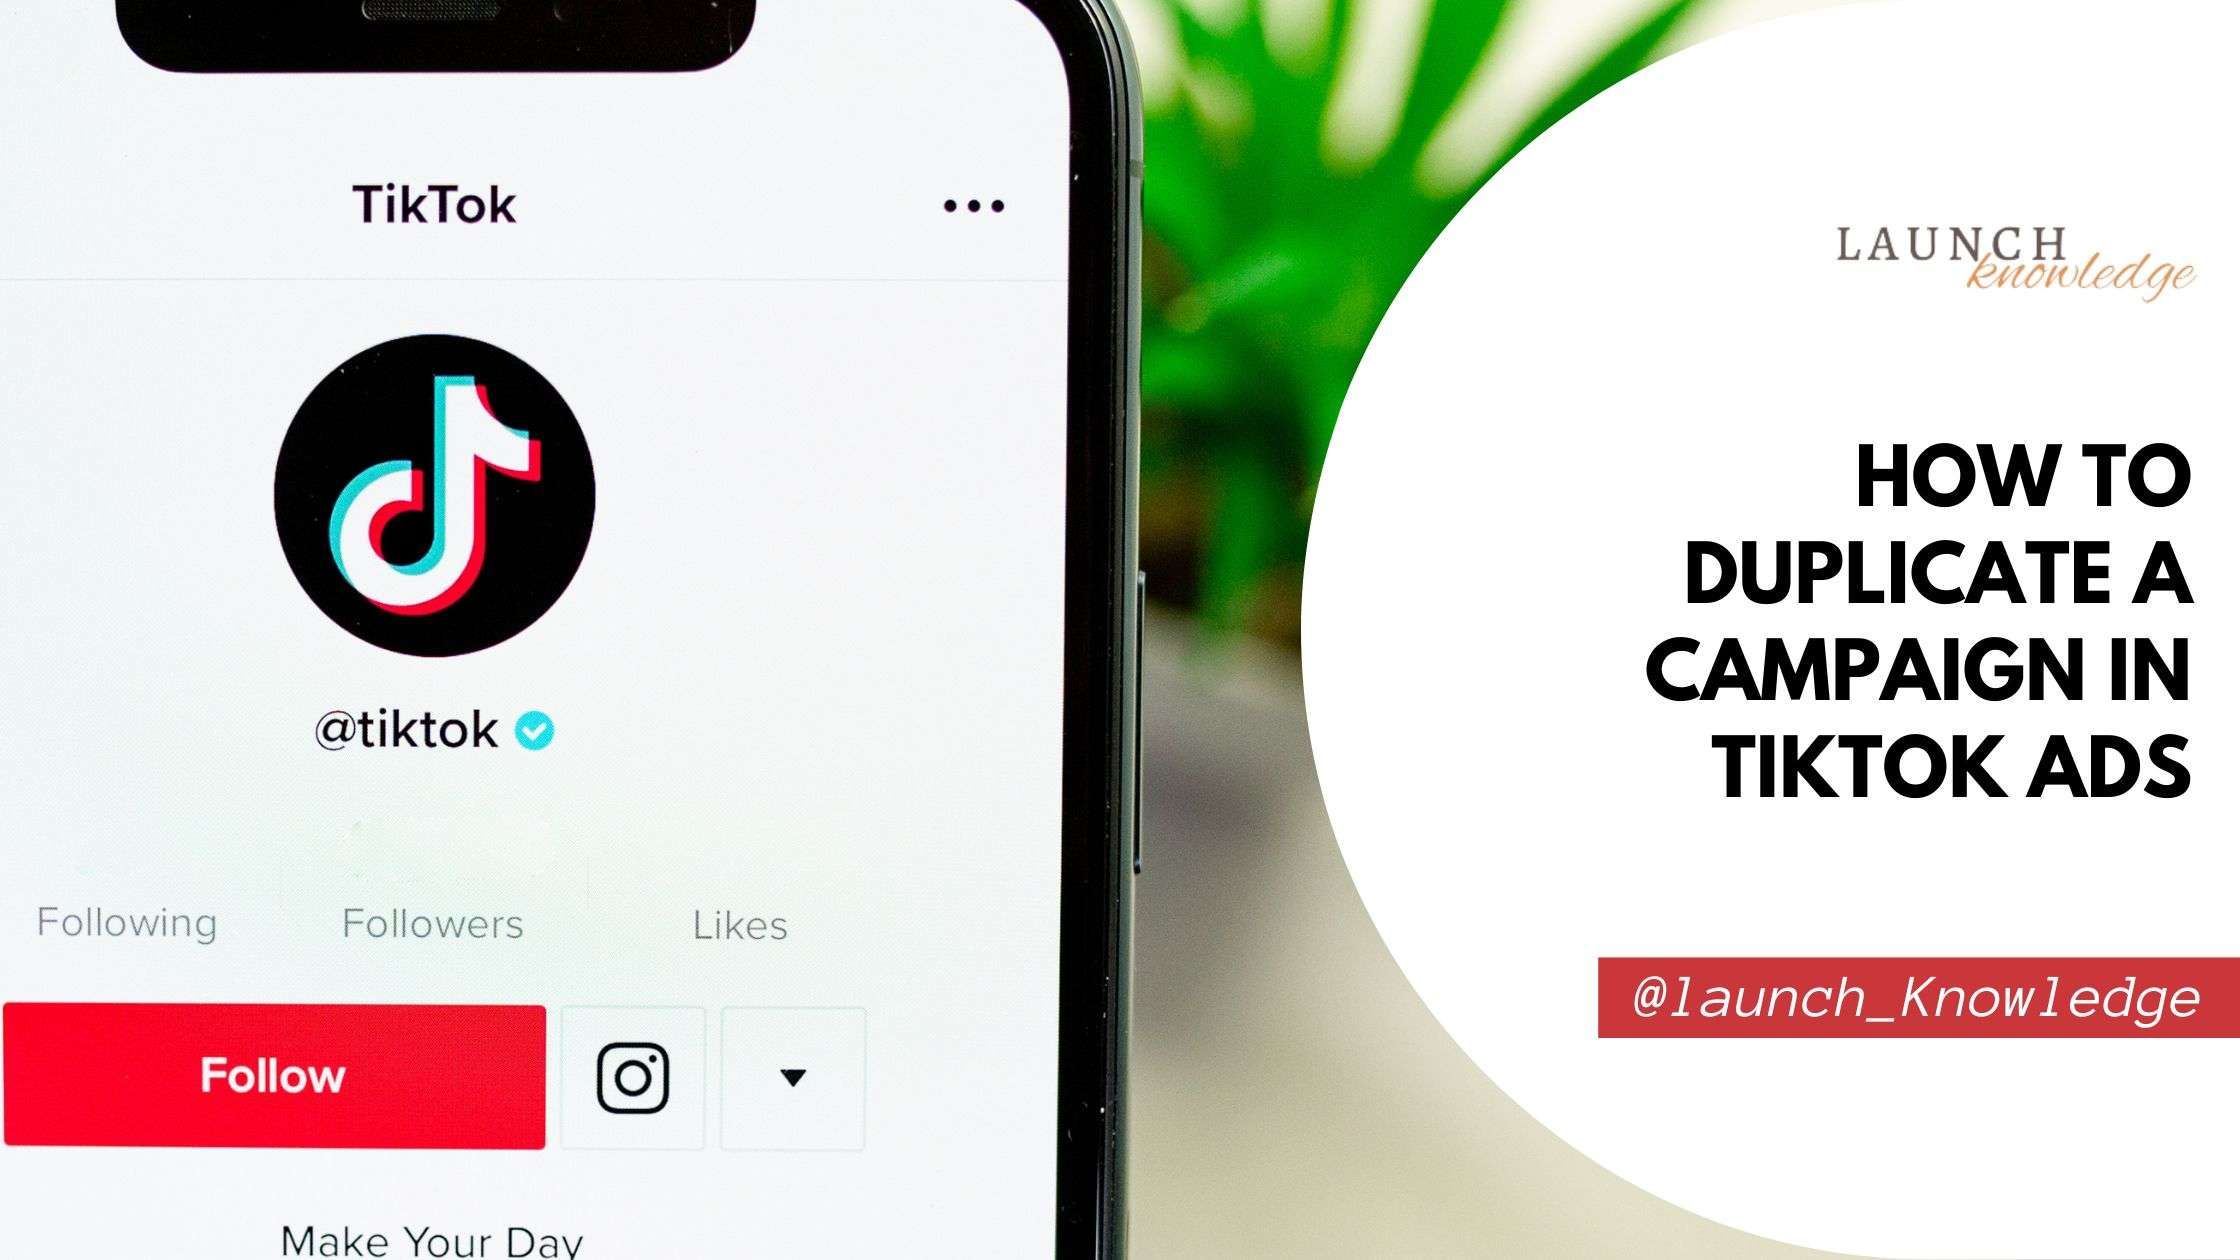 How to Duplicate a Campaign in TikTok Ads